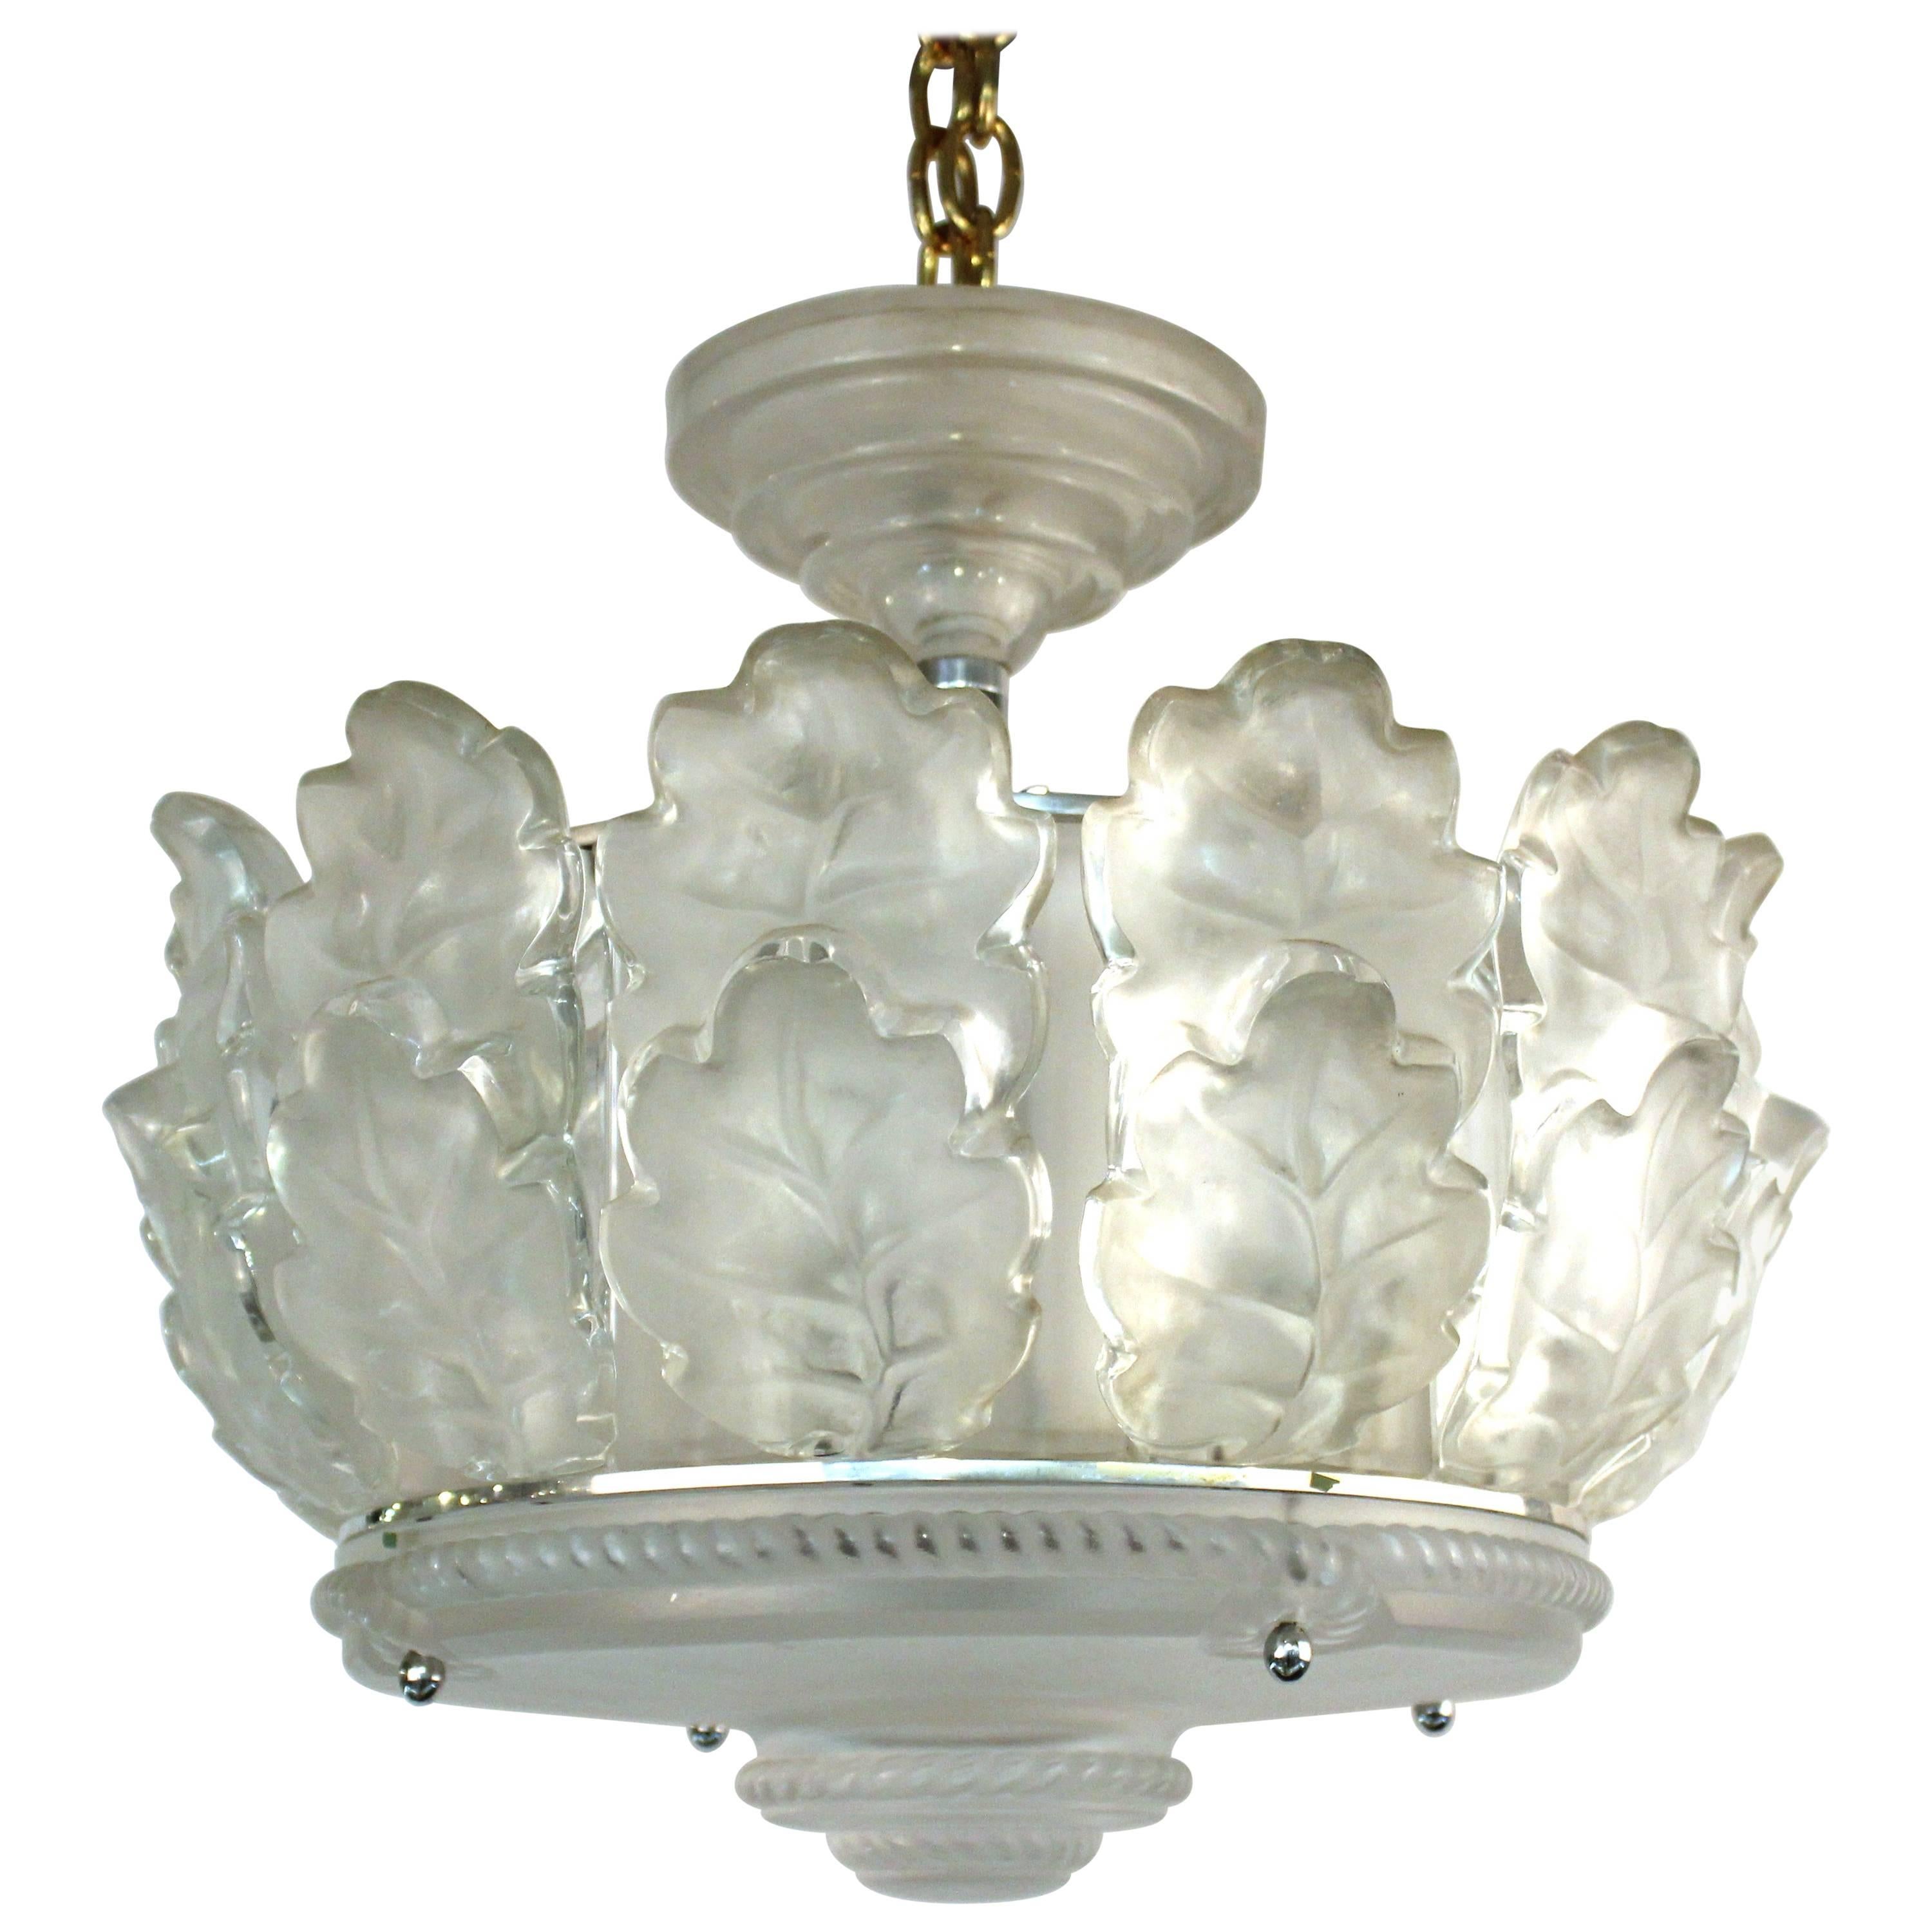 "Chene" Chandelier by Lalique